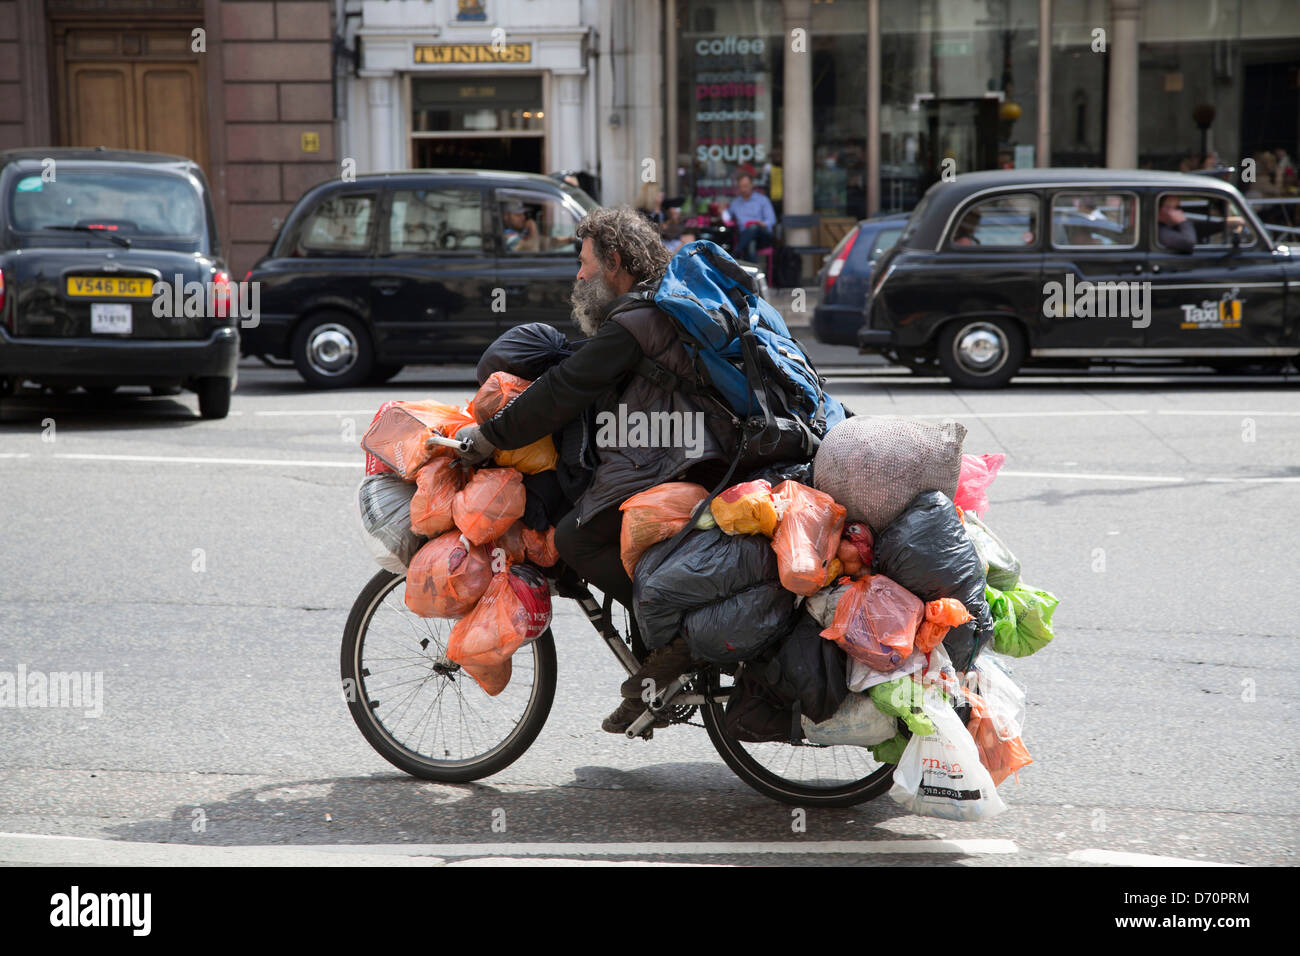 Tramp bag man bagman cycling through london weighed down with carrier bags Stock Photo